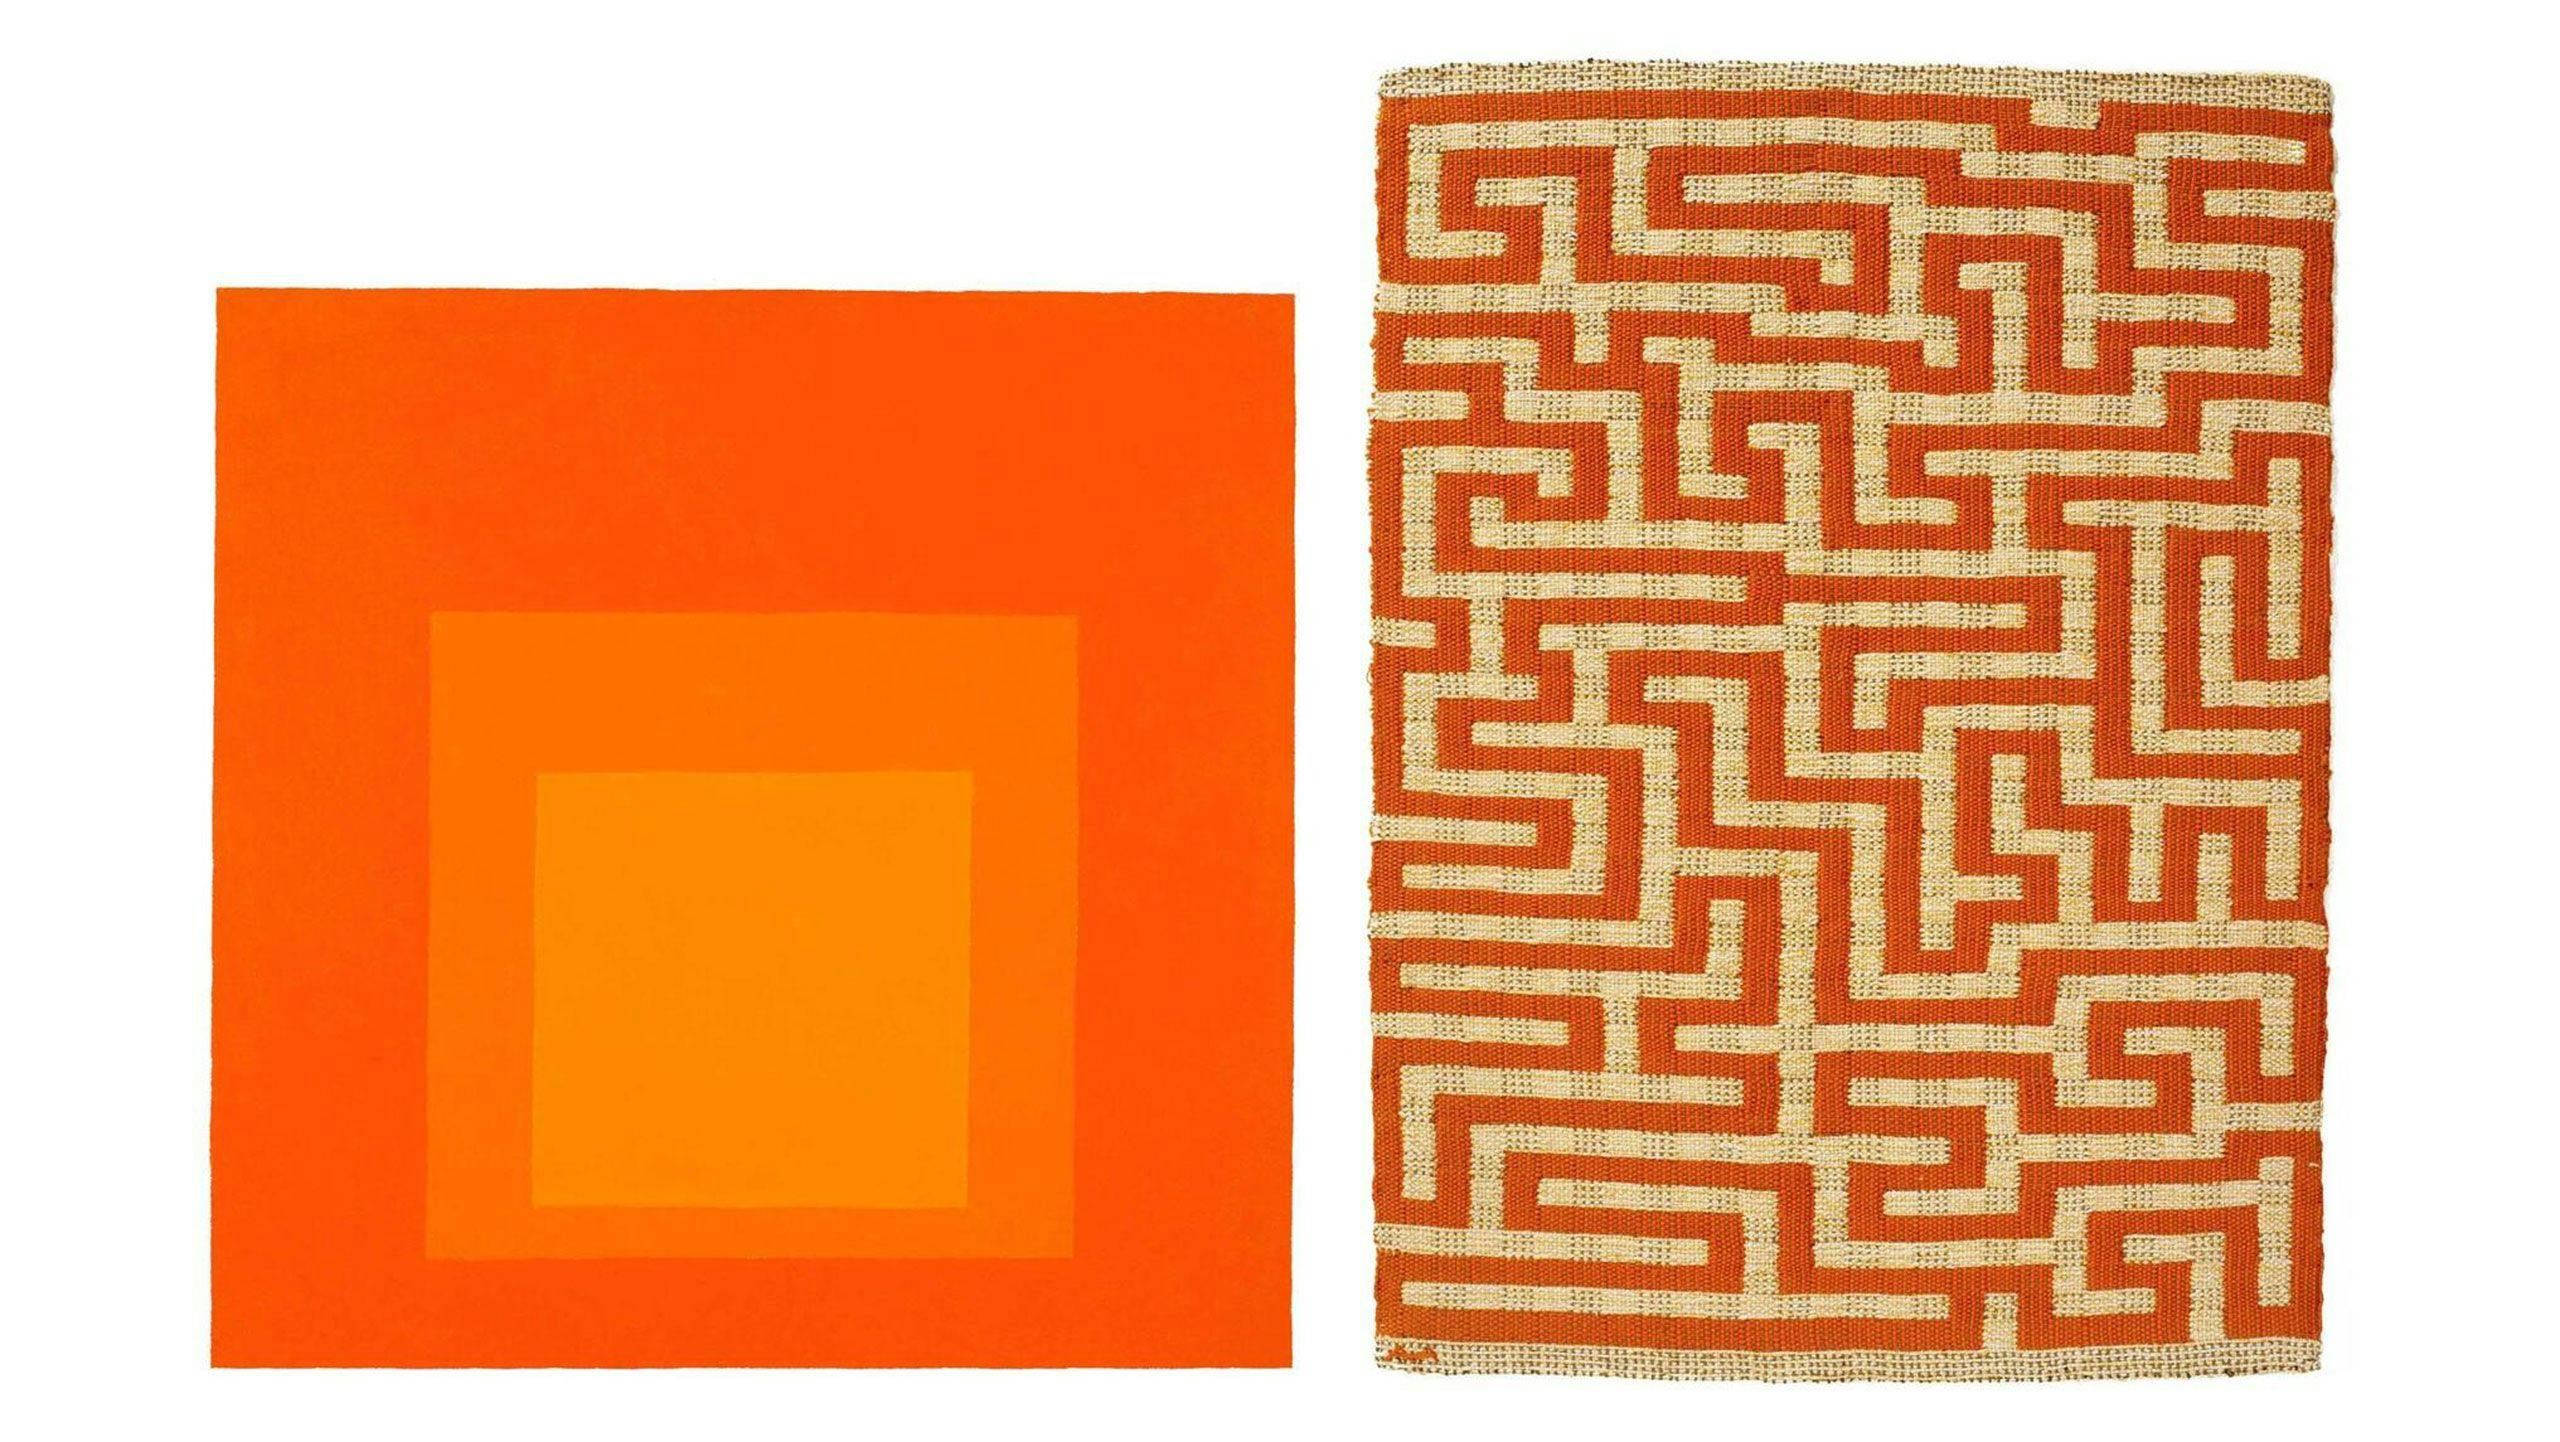 Josef Albers, Homage to the Square, 1957; Anni Albers, Red Meander, 1954. Courtesy The Josef and Anni Albers Foundation